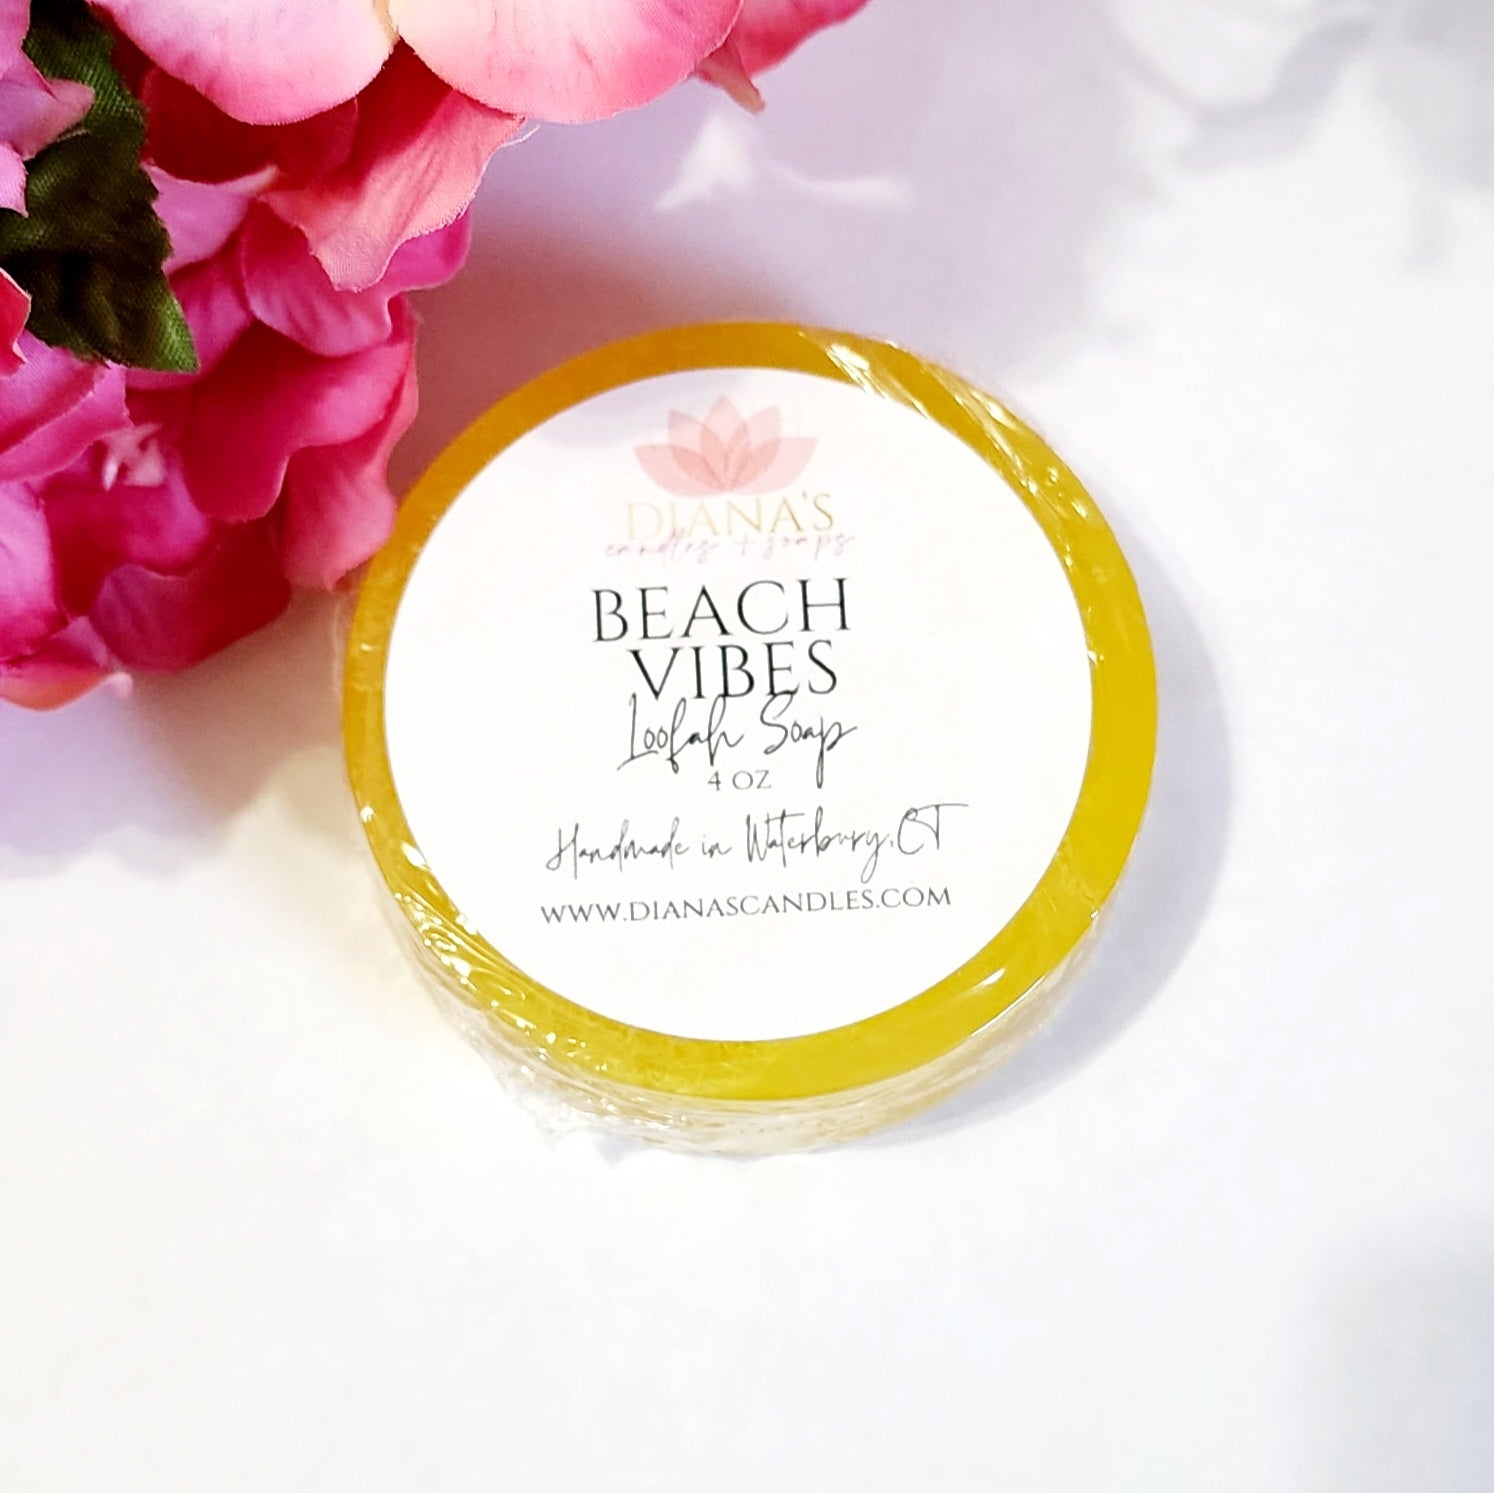 Beach Vibes Loofah Soap Diana's Candles and Soaps